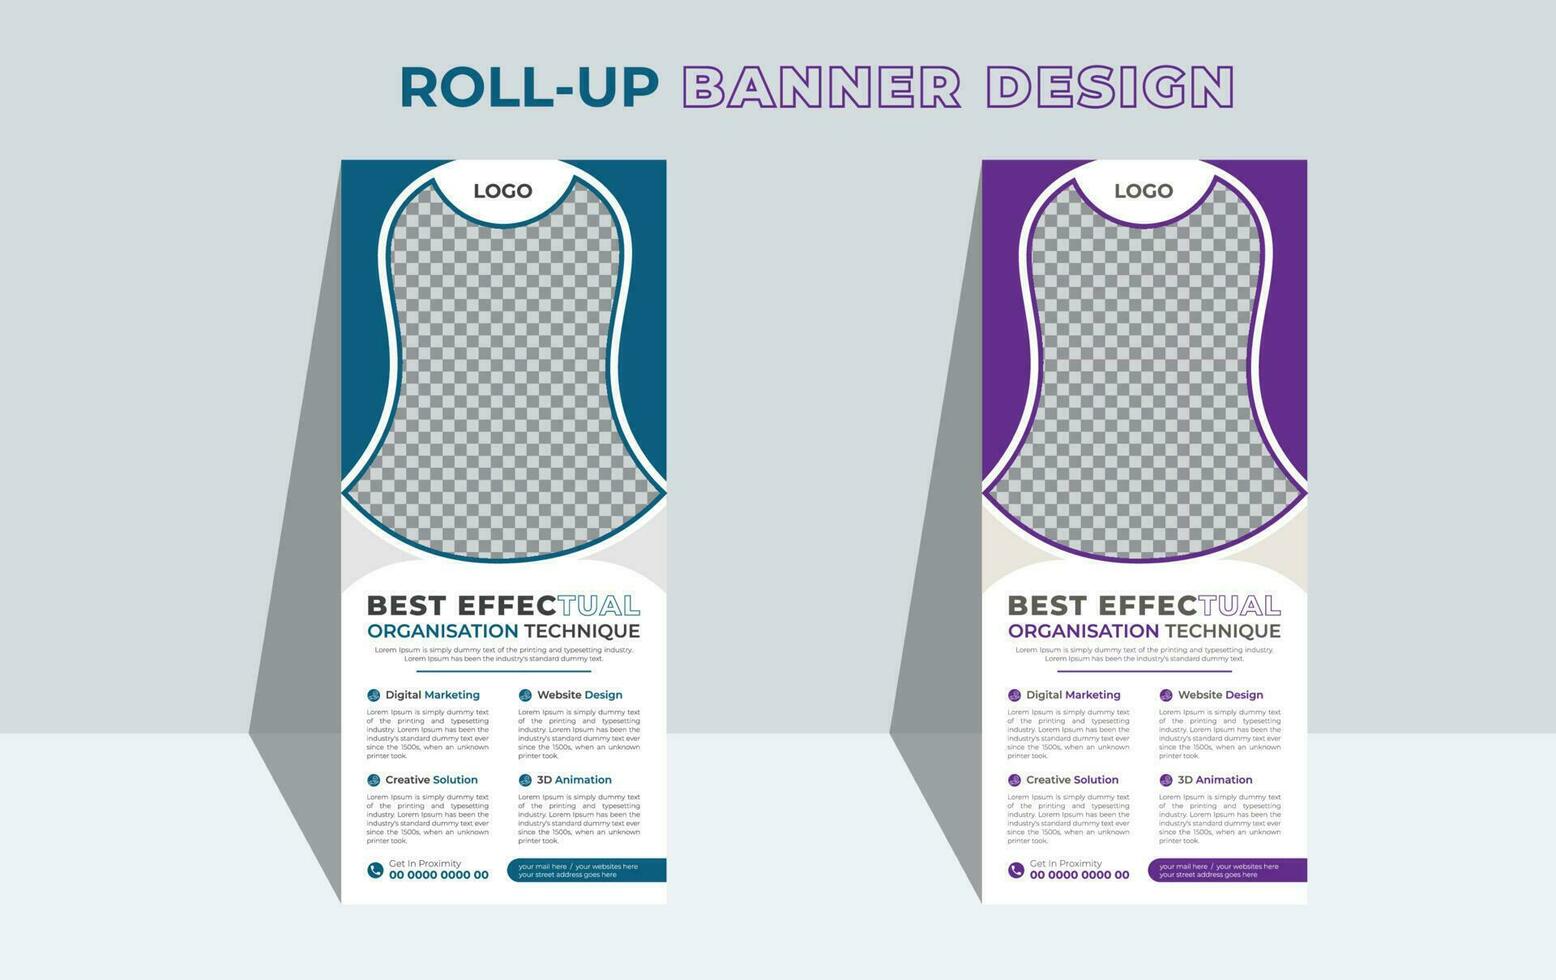 Modern Corporate Roll Up Banner Design or X banner Stand Template. Professional business pull up display exhibition standee banner. vector